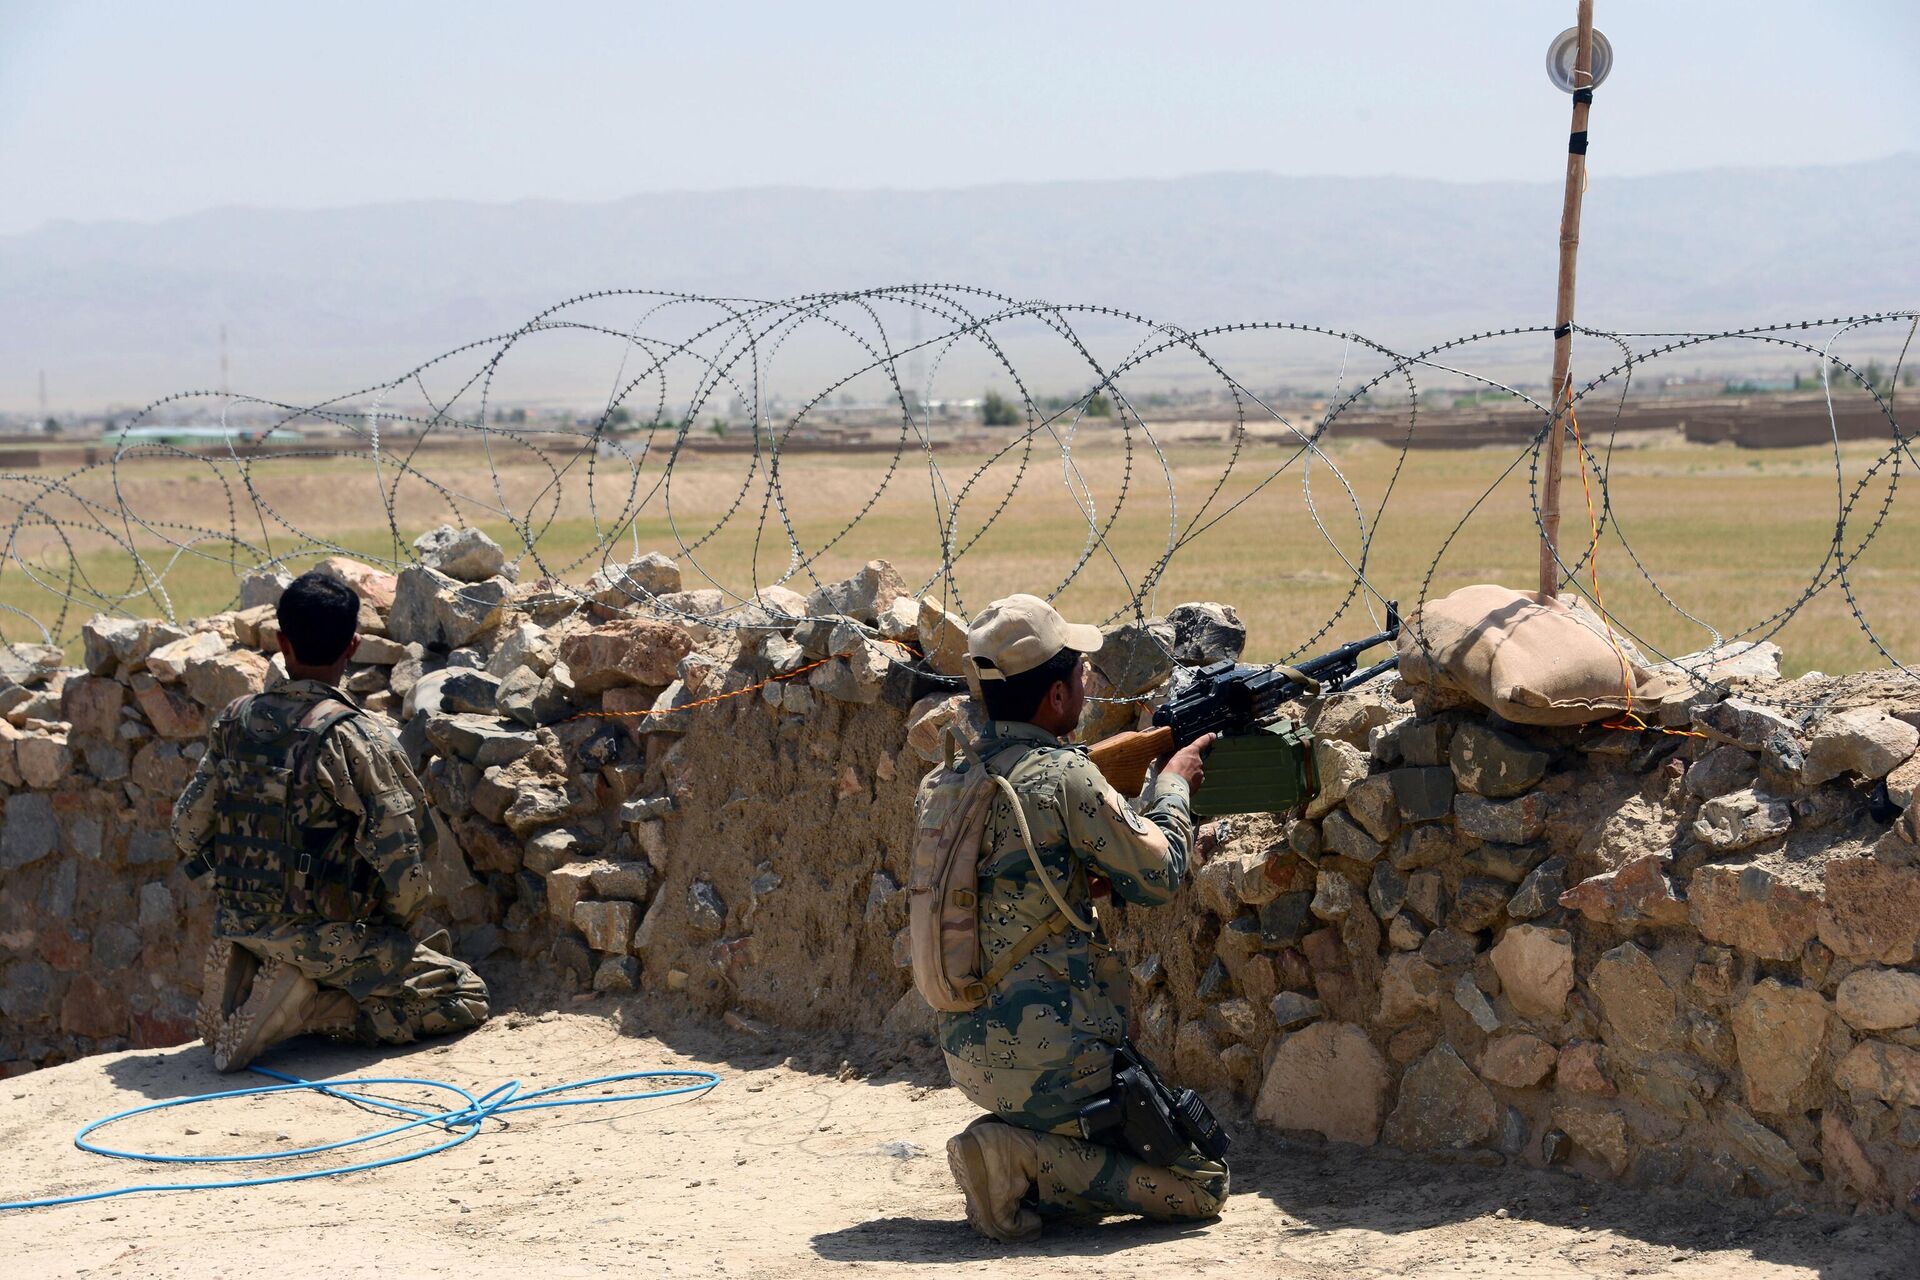 Afghan Border Police personnel keep watch during an ongoing battle between Pakistani and Afghan Border forces near the Durand line at Spin Boldak, in southern Kandahar province on May 5, 2017. Pakistani and Afghan officials have accused each other of killing civilians after gunfire erupted near a major border crossing where Pakistani census officials were carrying out a count, exacerbating tensions between the neighbours. (Photo by JAVED TANVEER / AFP) - Sputnik India, 1920, 23.03.2024